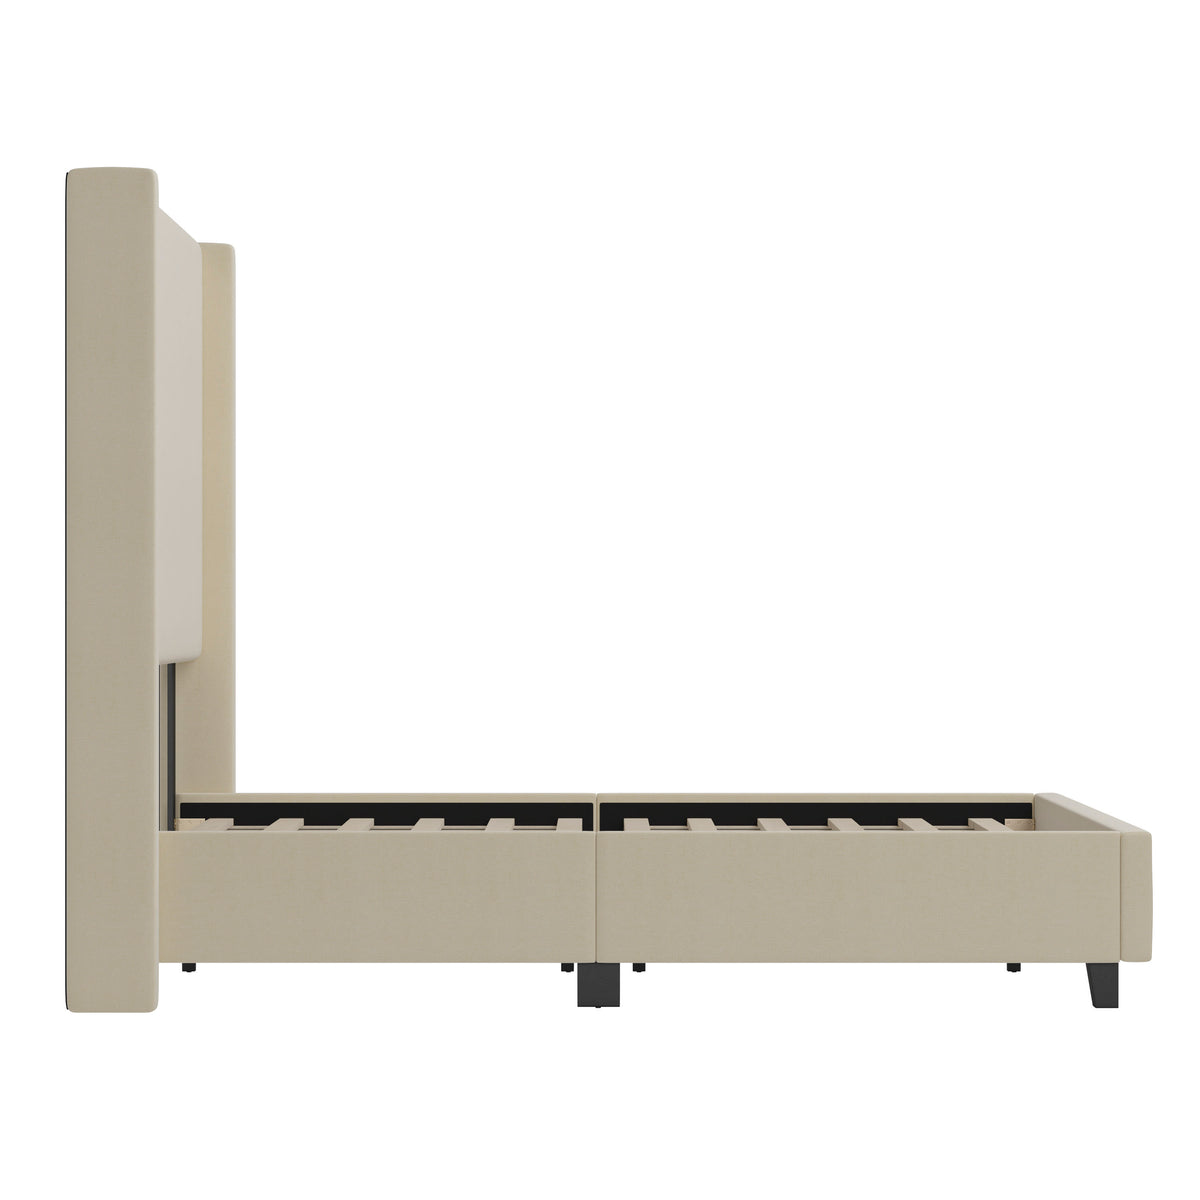 Beige,Full |#| Full Size Upholstered Platform Bed with Channel Stitched Headboard in Beige